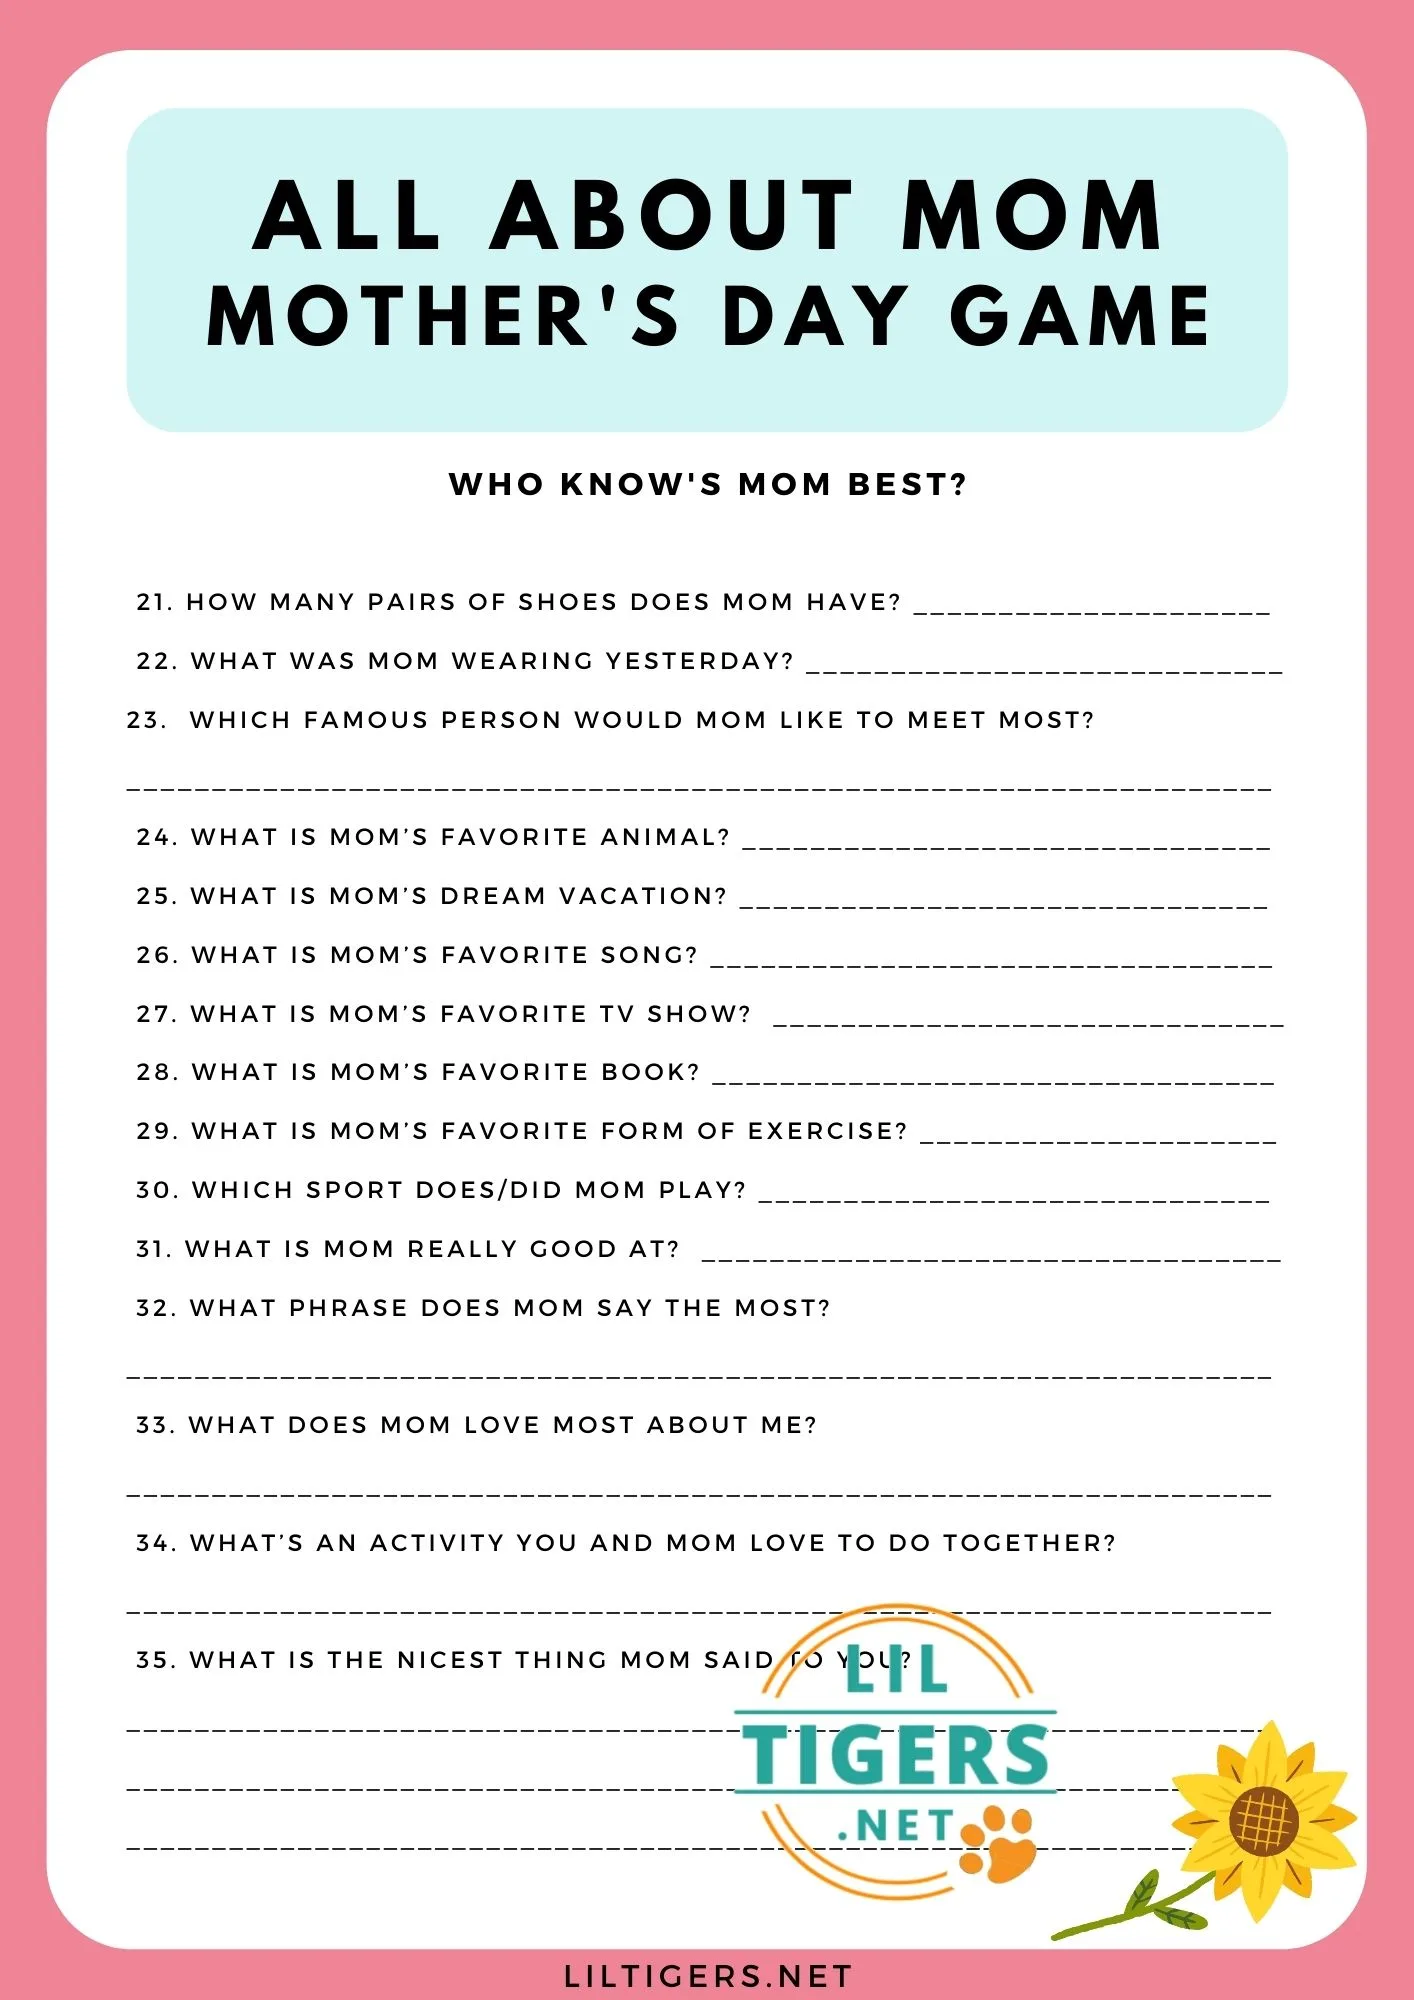 All About Mom Mother's Day Game